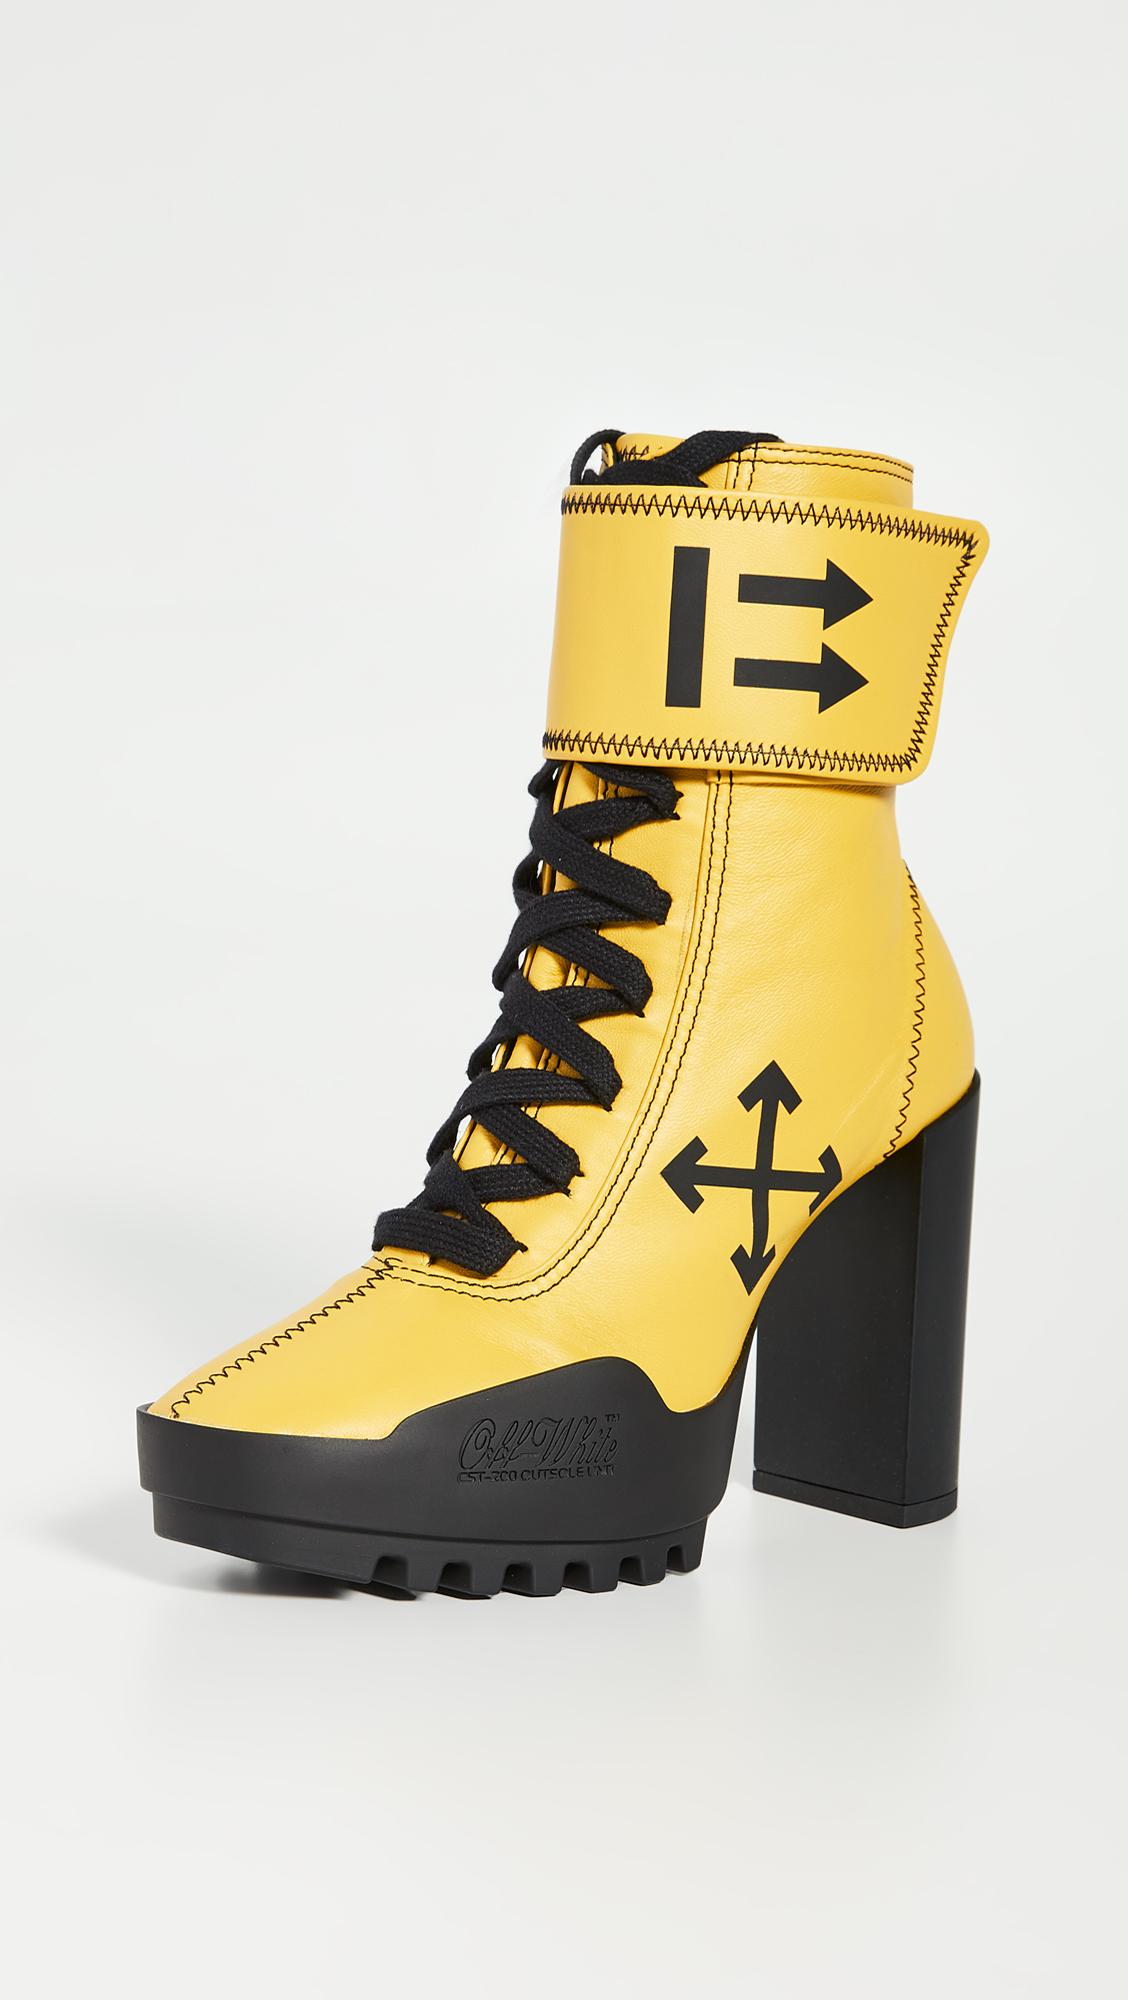 Off-White c/o Virgil Abloh Arrow Heeled Moto Wrap Boots in Yellow | Lyst